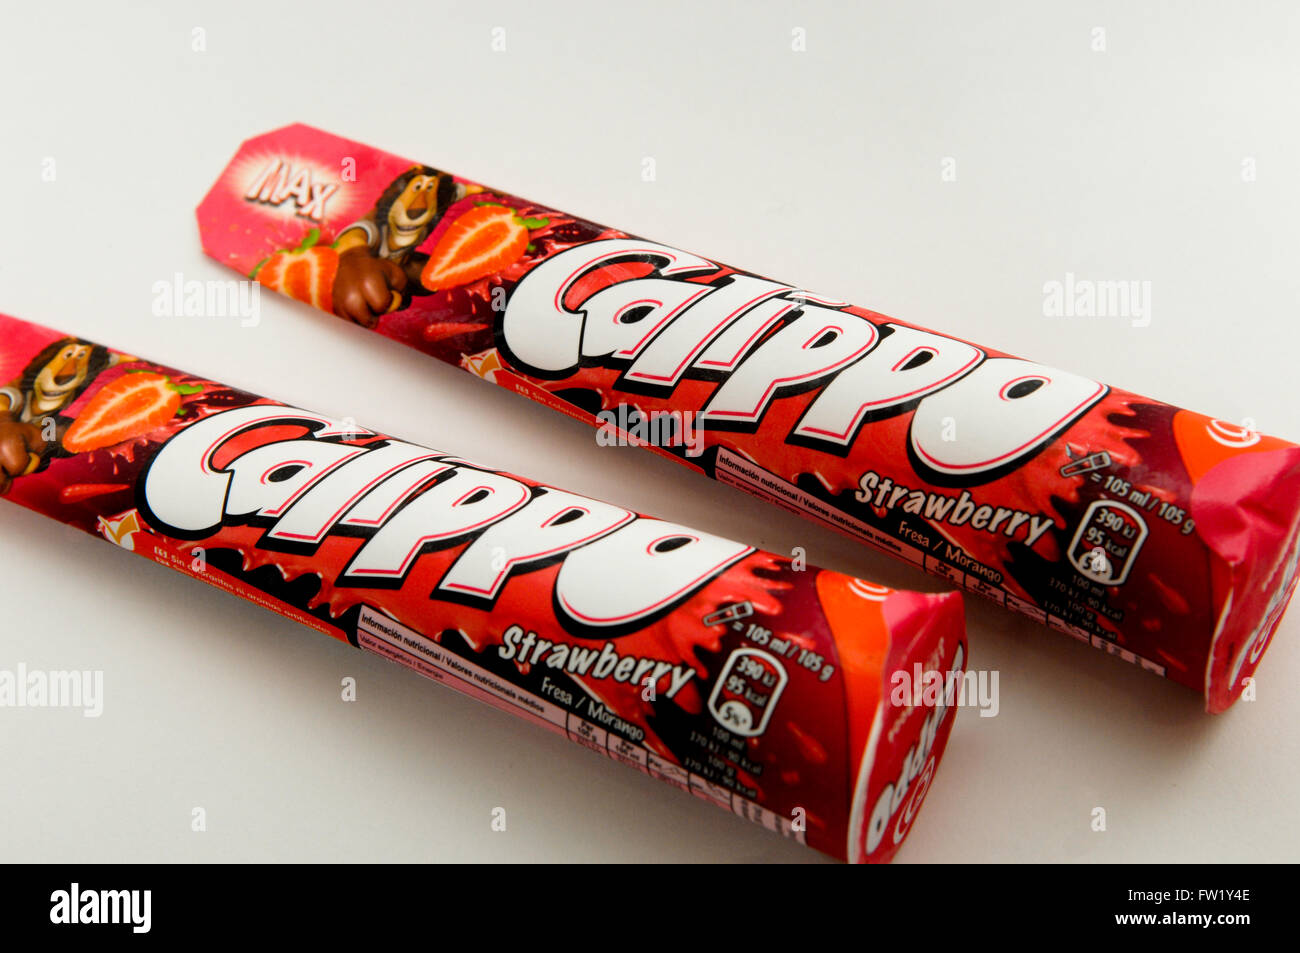 Calippo is a freezie brand owned by Unilever, and sold as part of the Heartbrand line of products in most countries Stock Photo